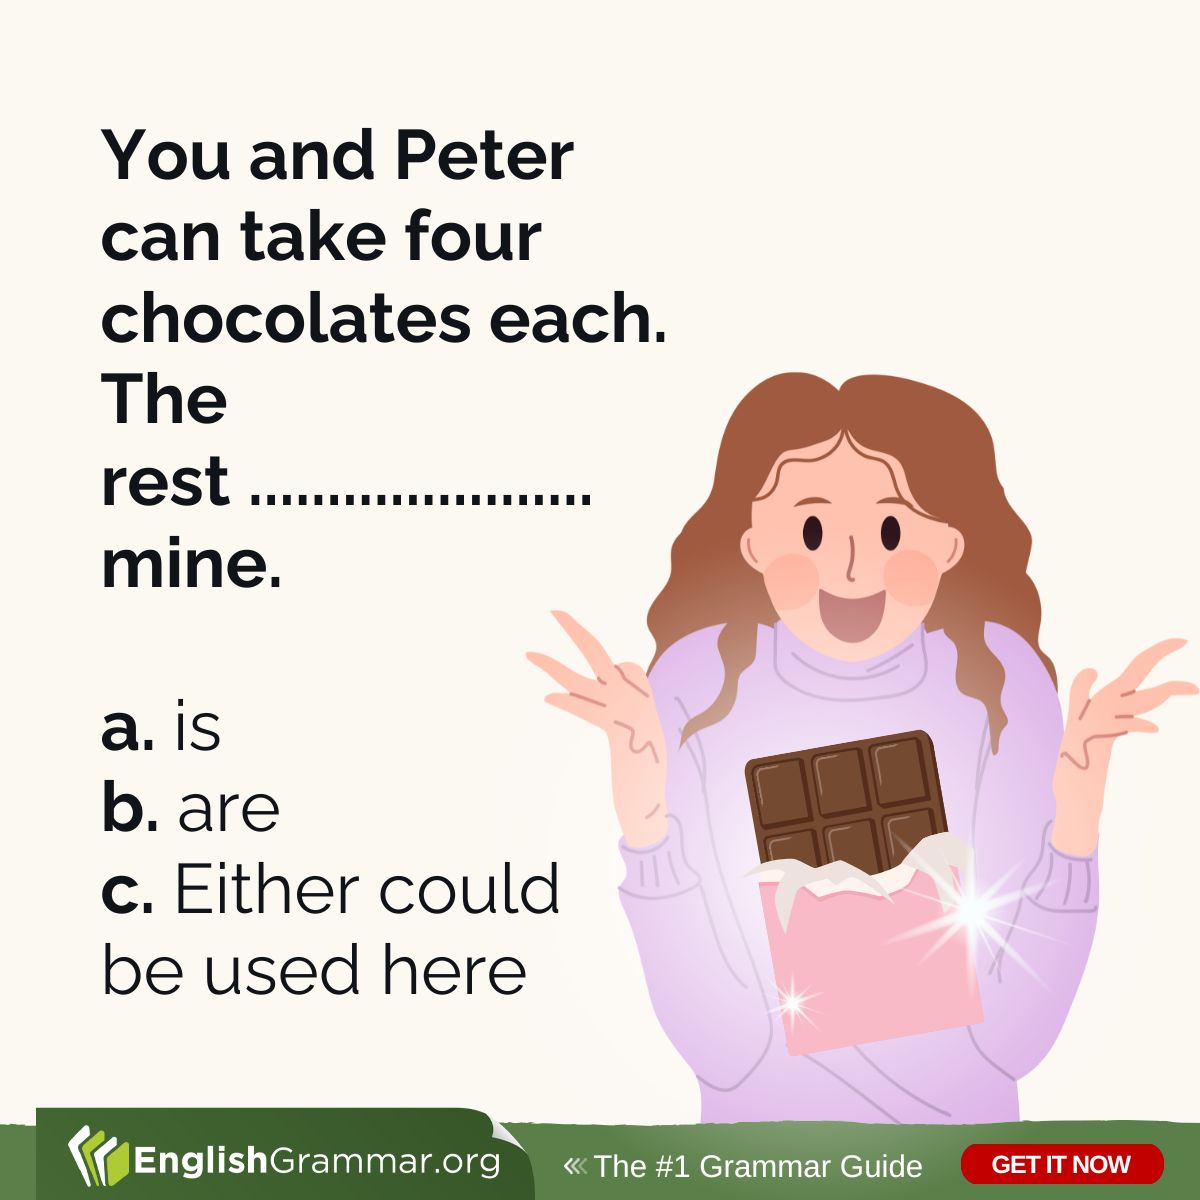 Anyone?

Find the right answer here: englishgrammar.org/commonly-confu…

#amwriting #writing #grammar